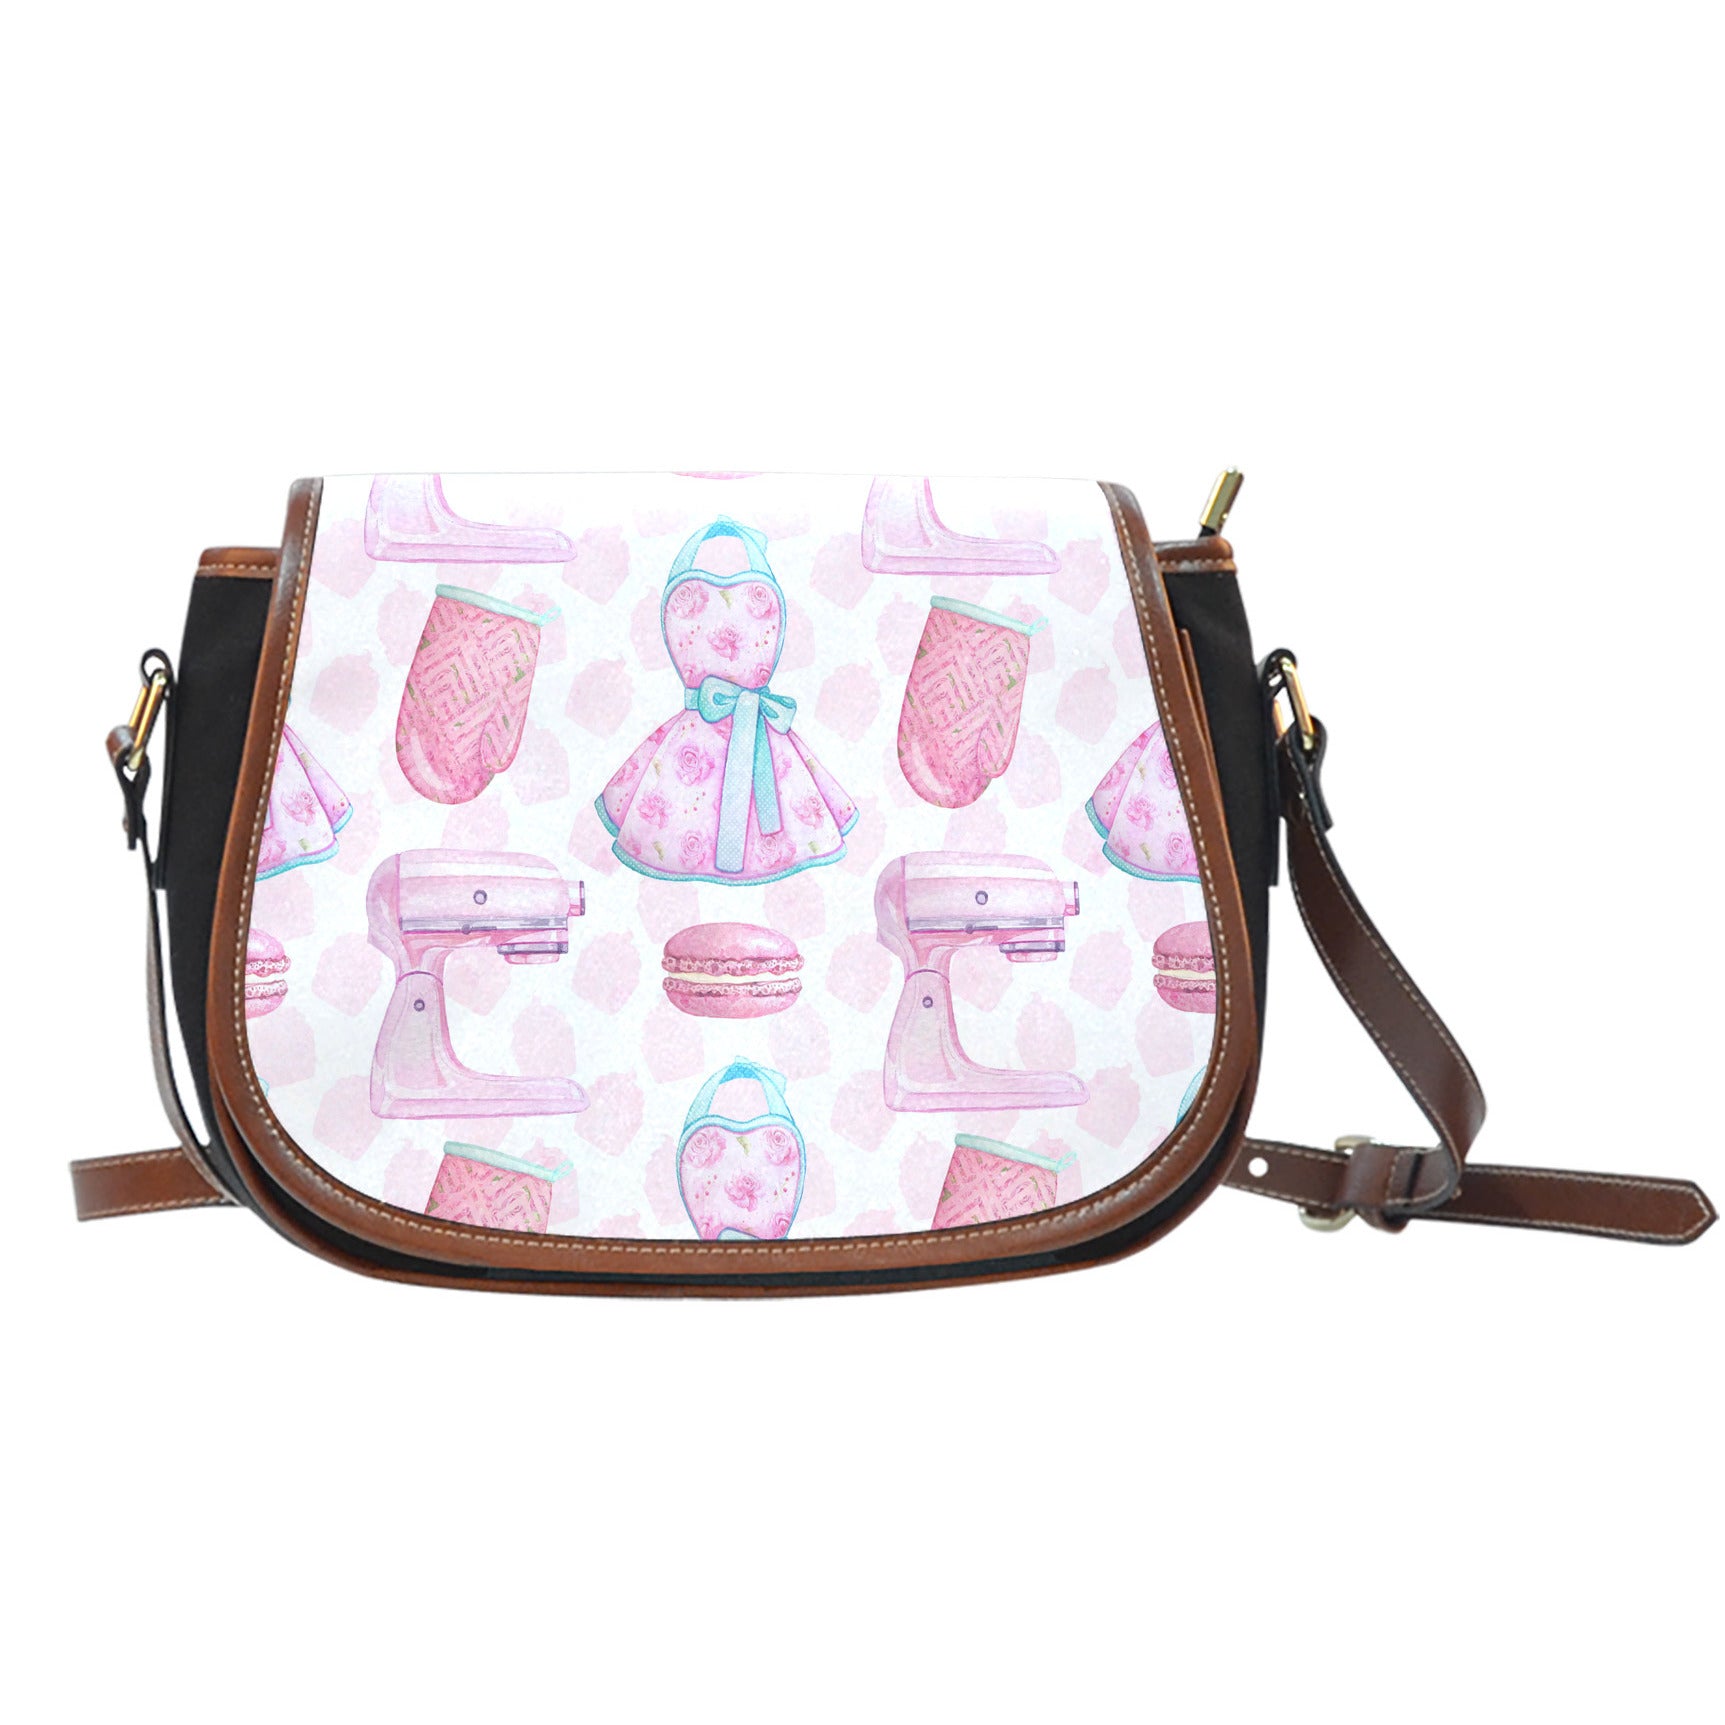 Baking Themed Aprons And Mixers Crossbody Shoulder Canvas Leather Saddle Bag